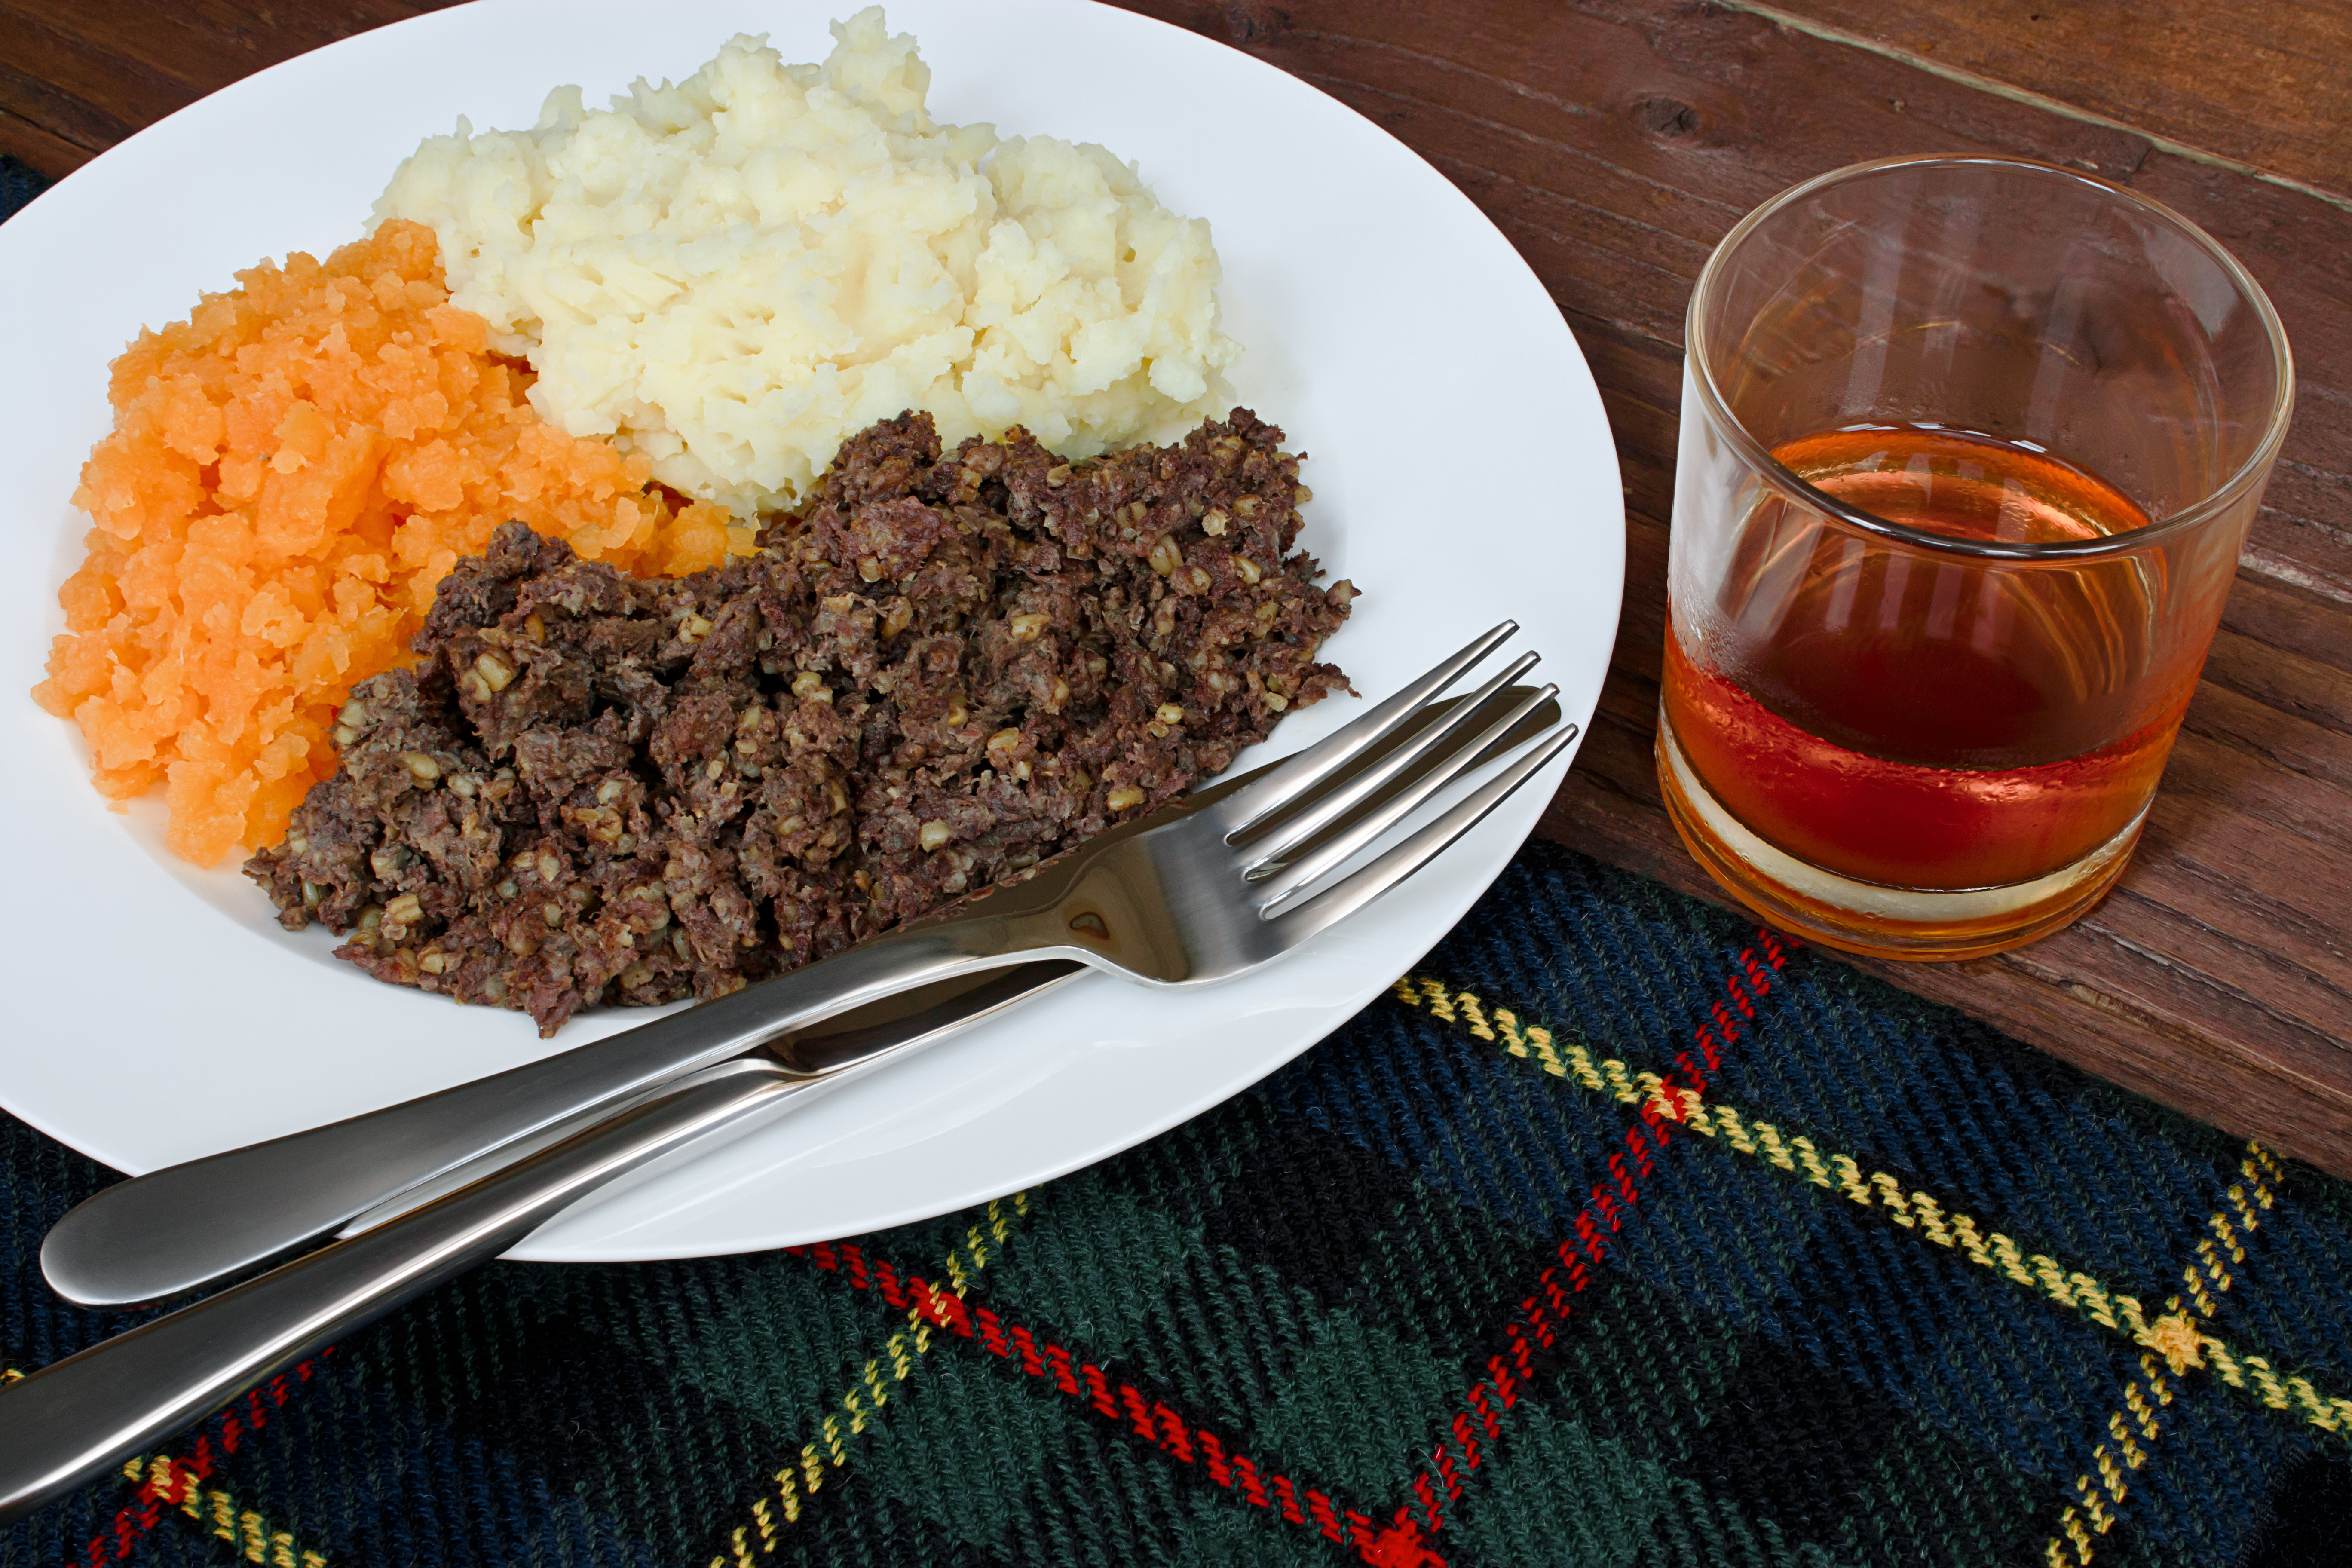 A plate of haggis, mashed potatoes and turnips with a glass of Scotch whisky placed on a Scottish tartan tablecloth.